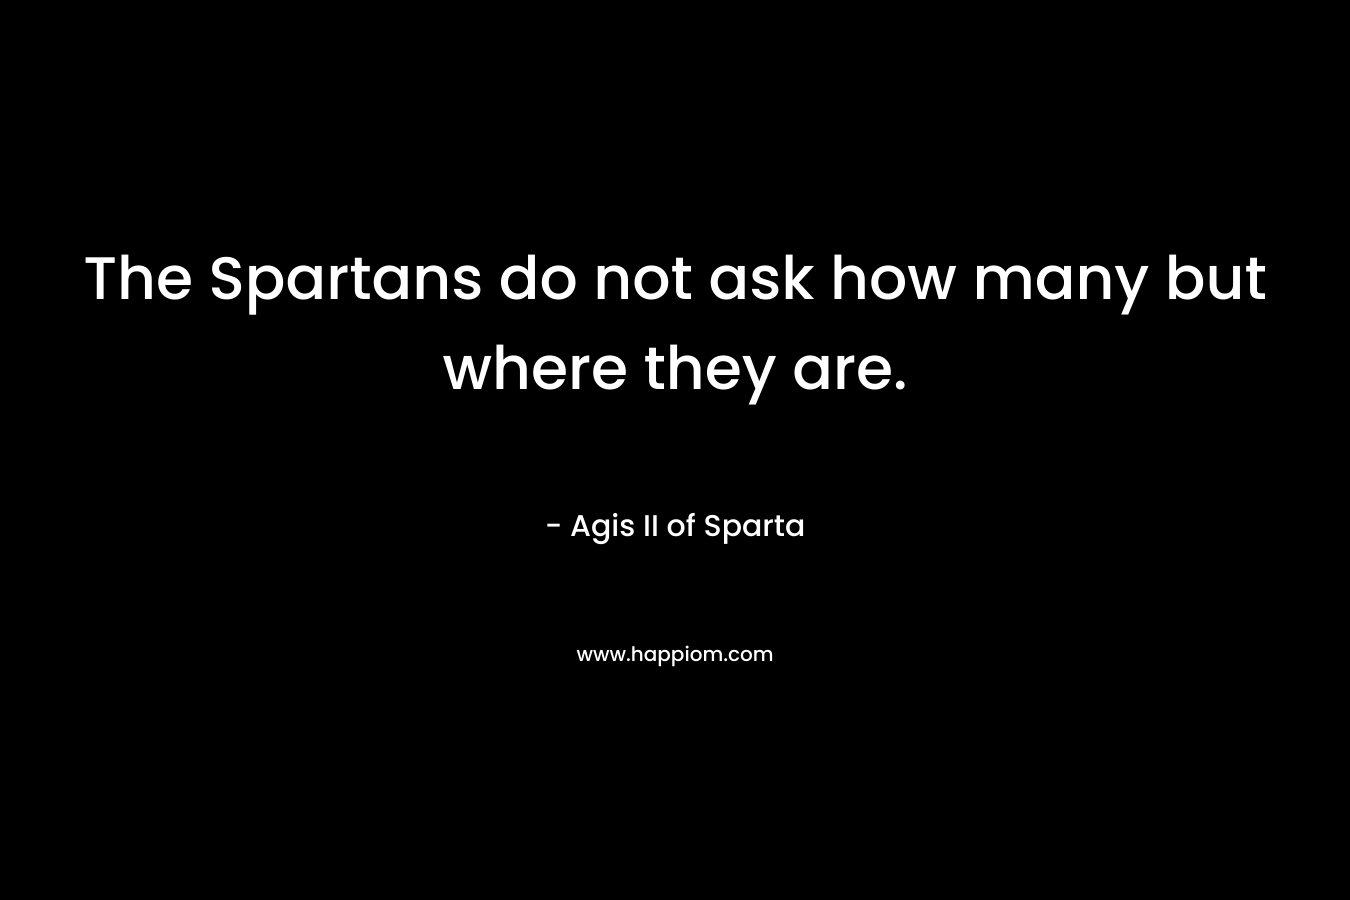 The Spartans do not ask how many but where they are.